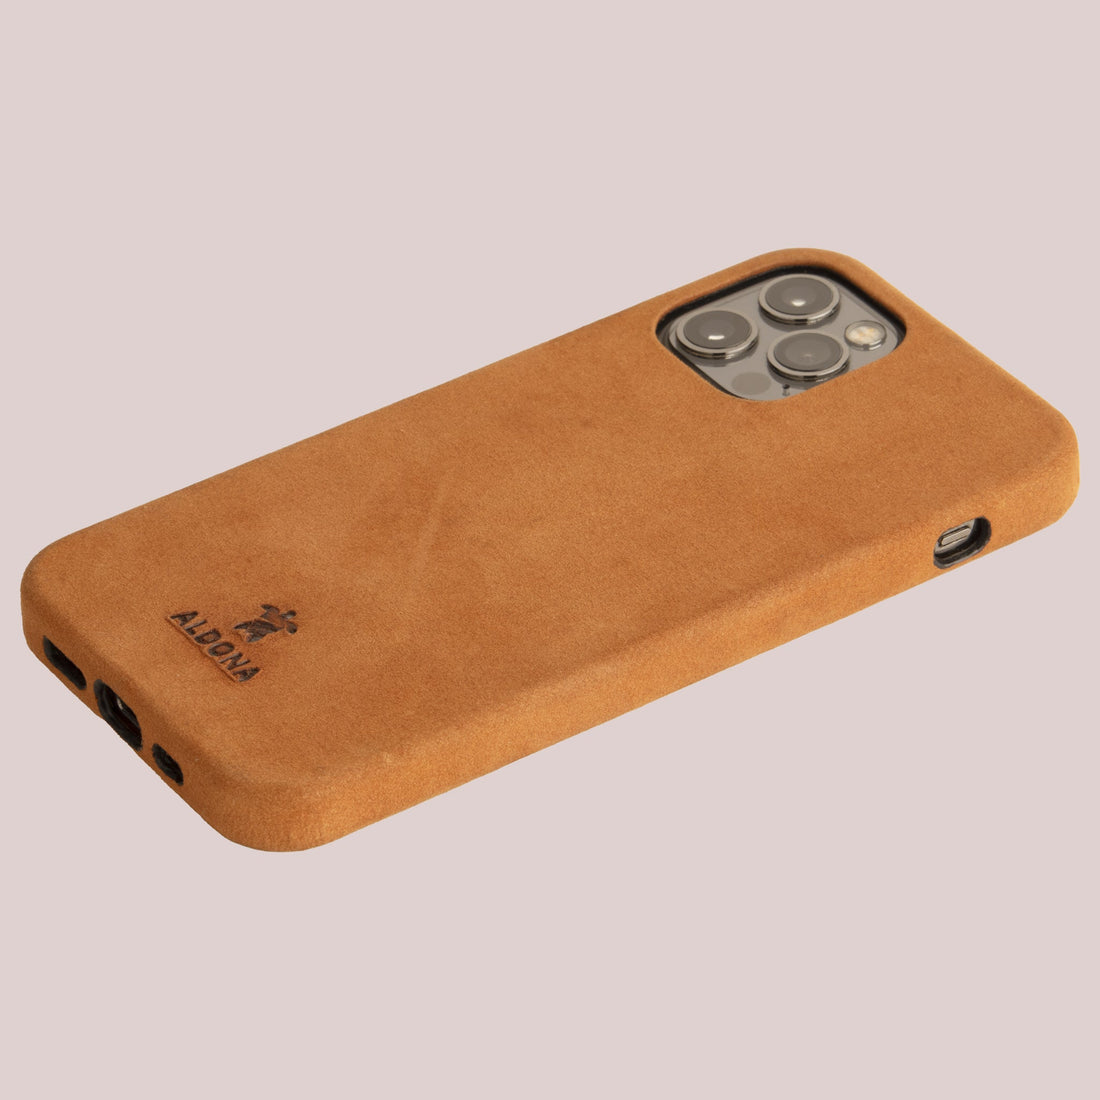 Kalon Case for iPhone 14 series with MagSafe Compatibility - Cognac